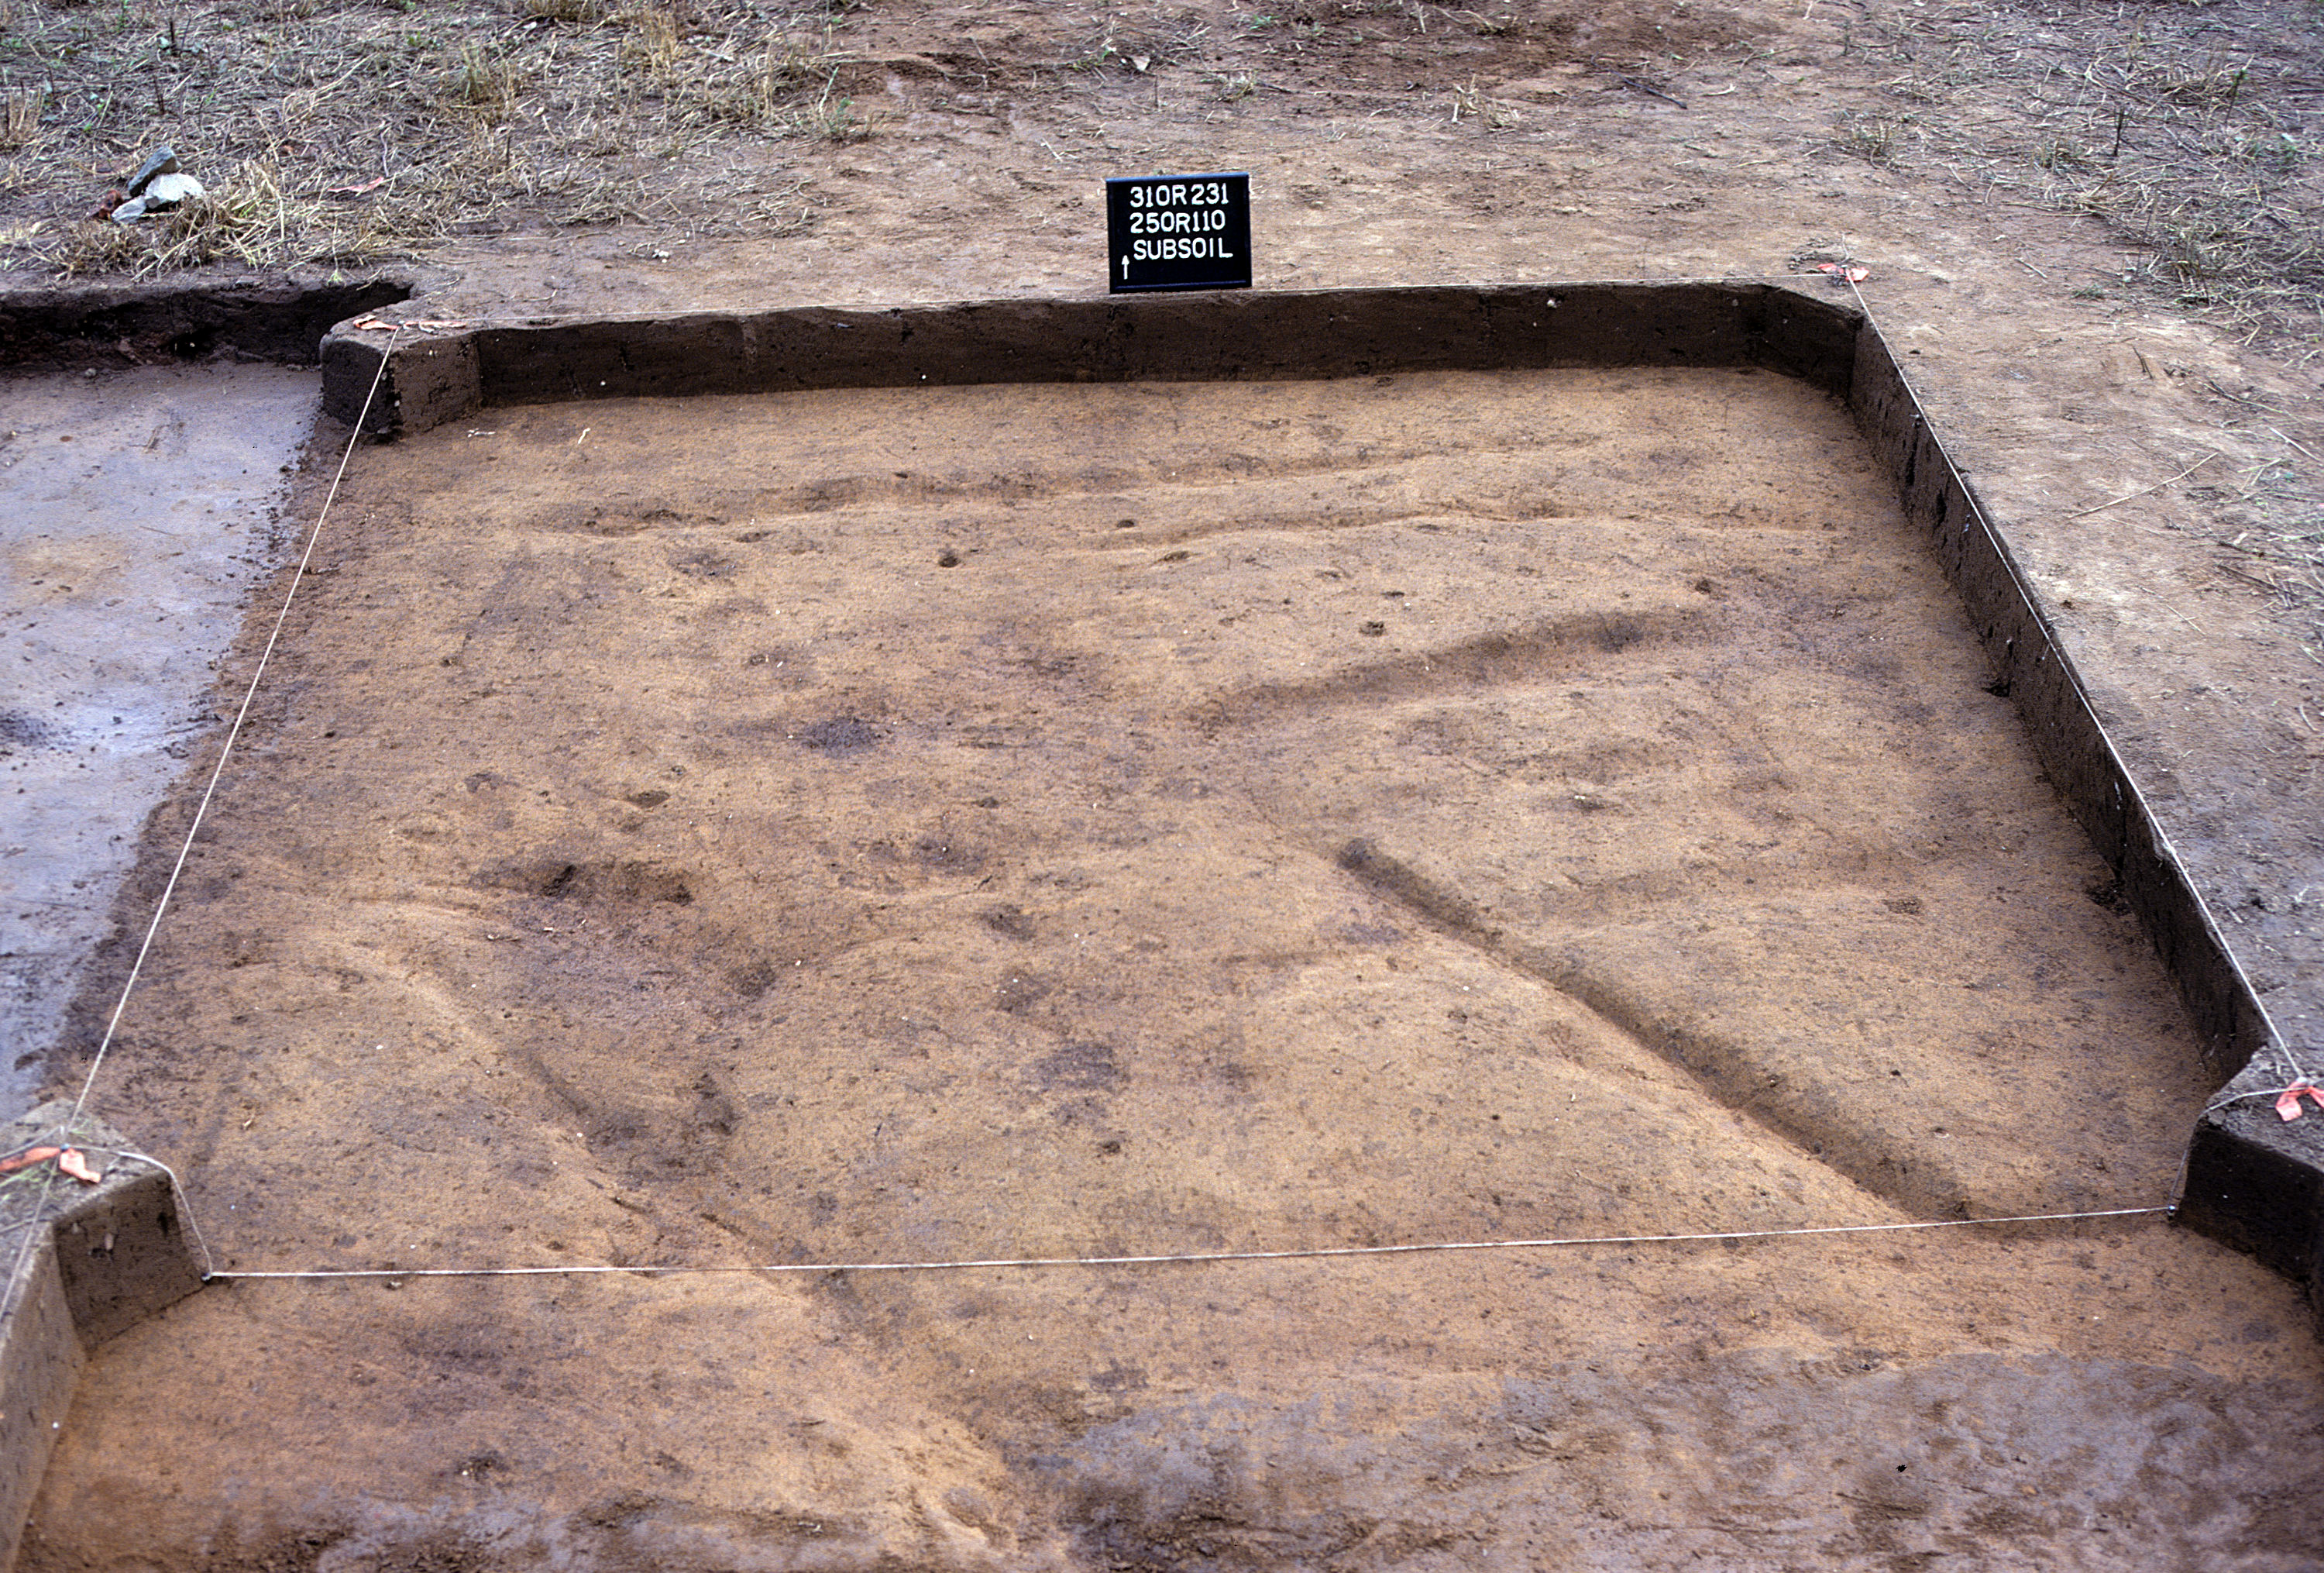 Figure 875. Sq. 250R110 at top of subsoil (view to north).